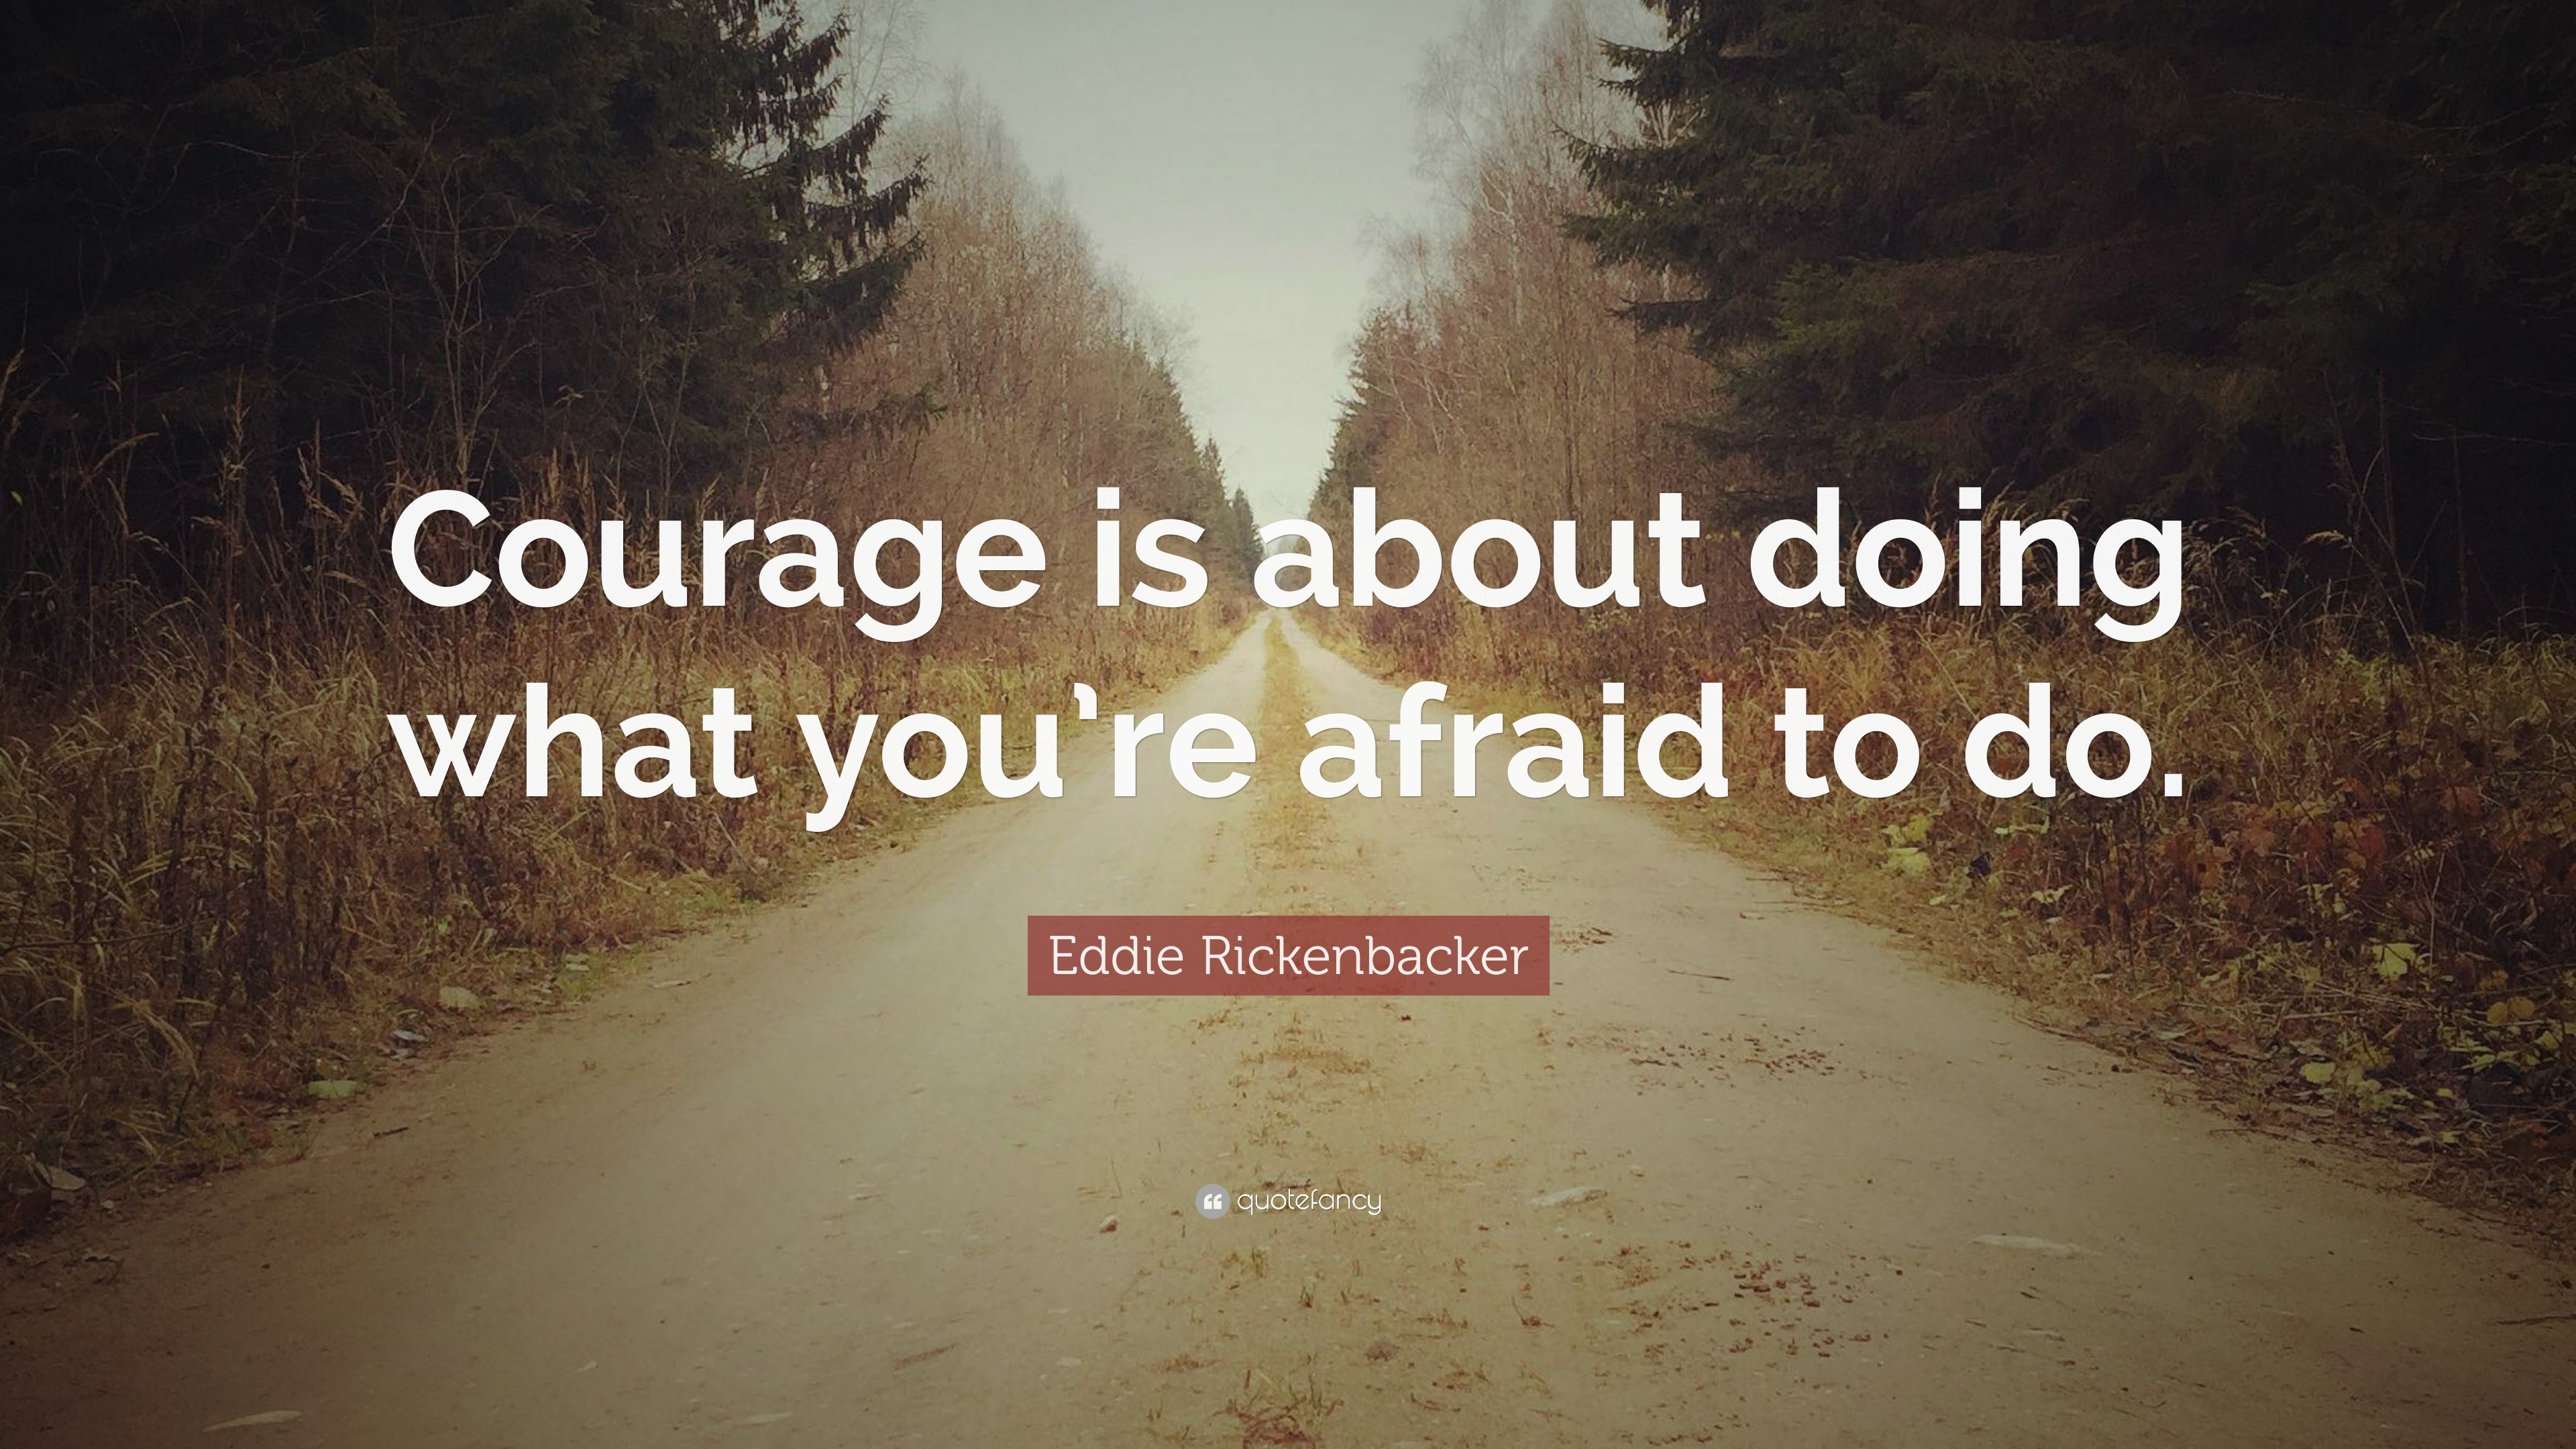 Eddie Rickenbacker Quote: “Courage is about doing what you’re afraid to ...